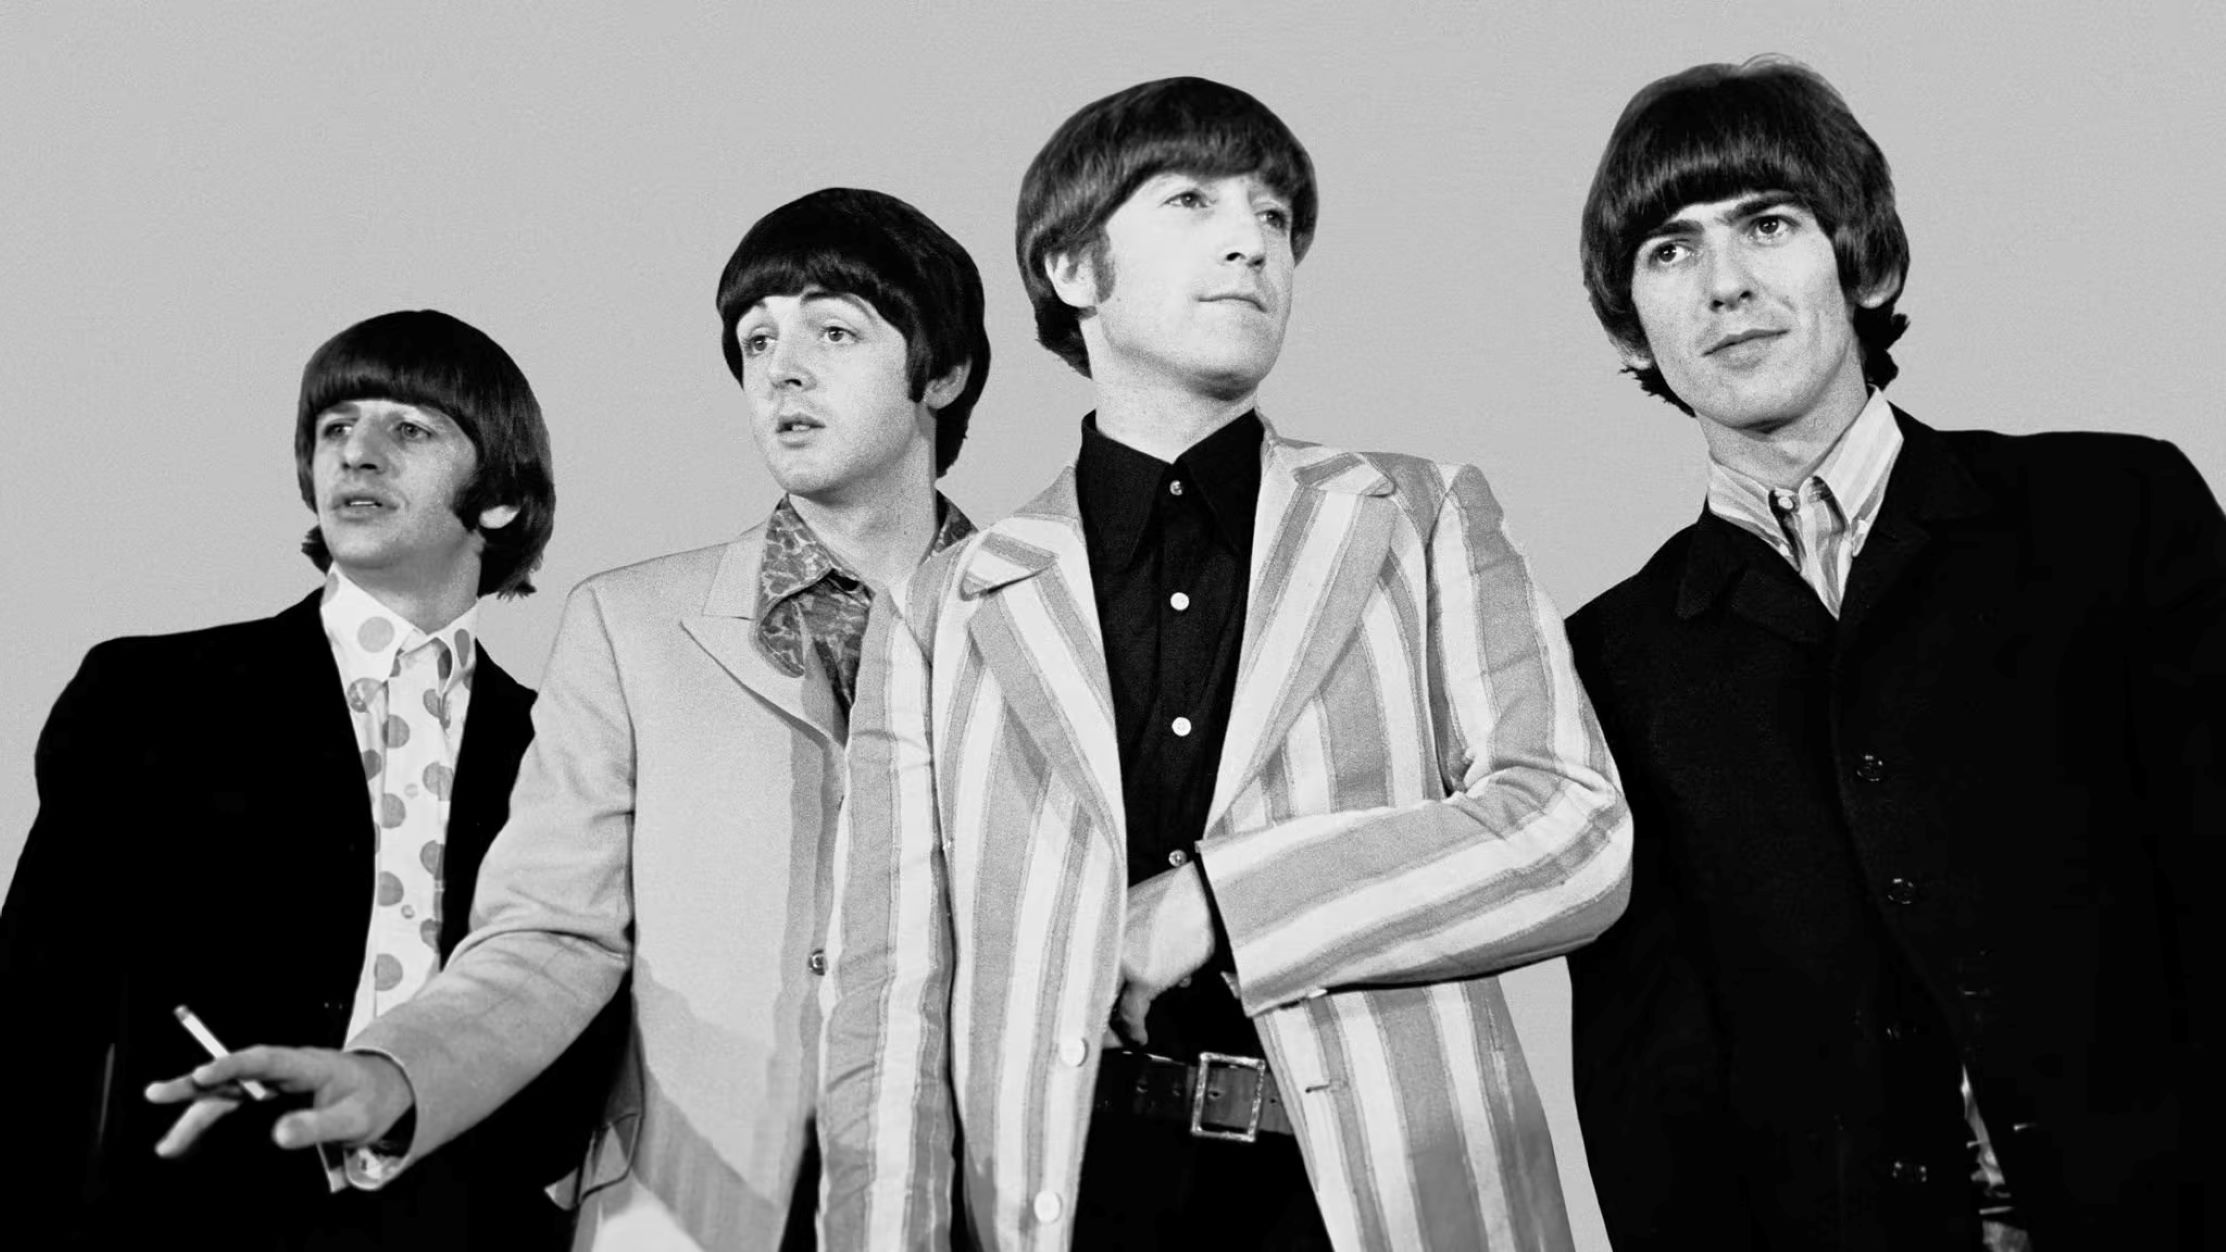 Which Record Label Was The Beatles Turned Down By